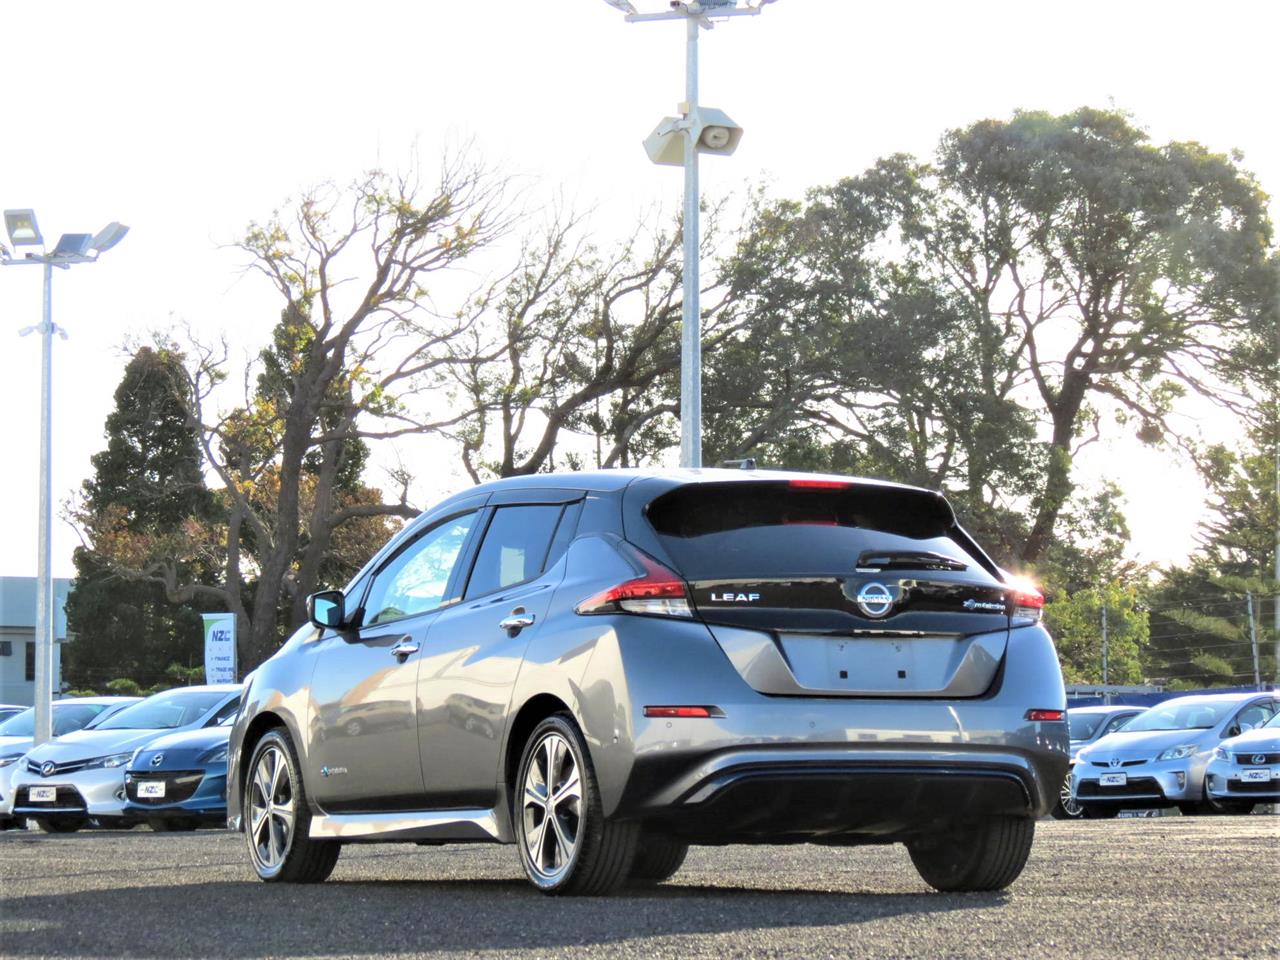 2018 Nissan Leaf only $98 weekly